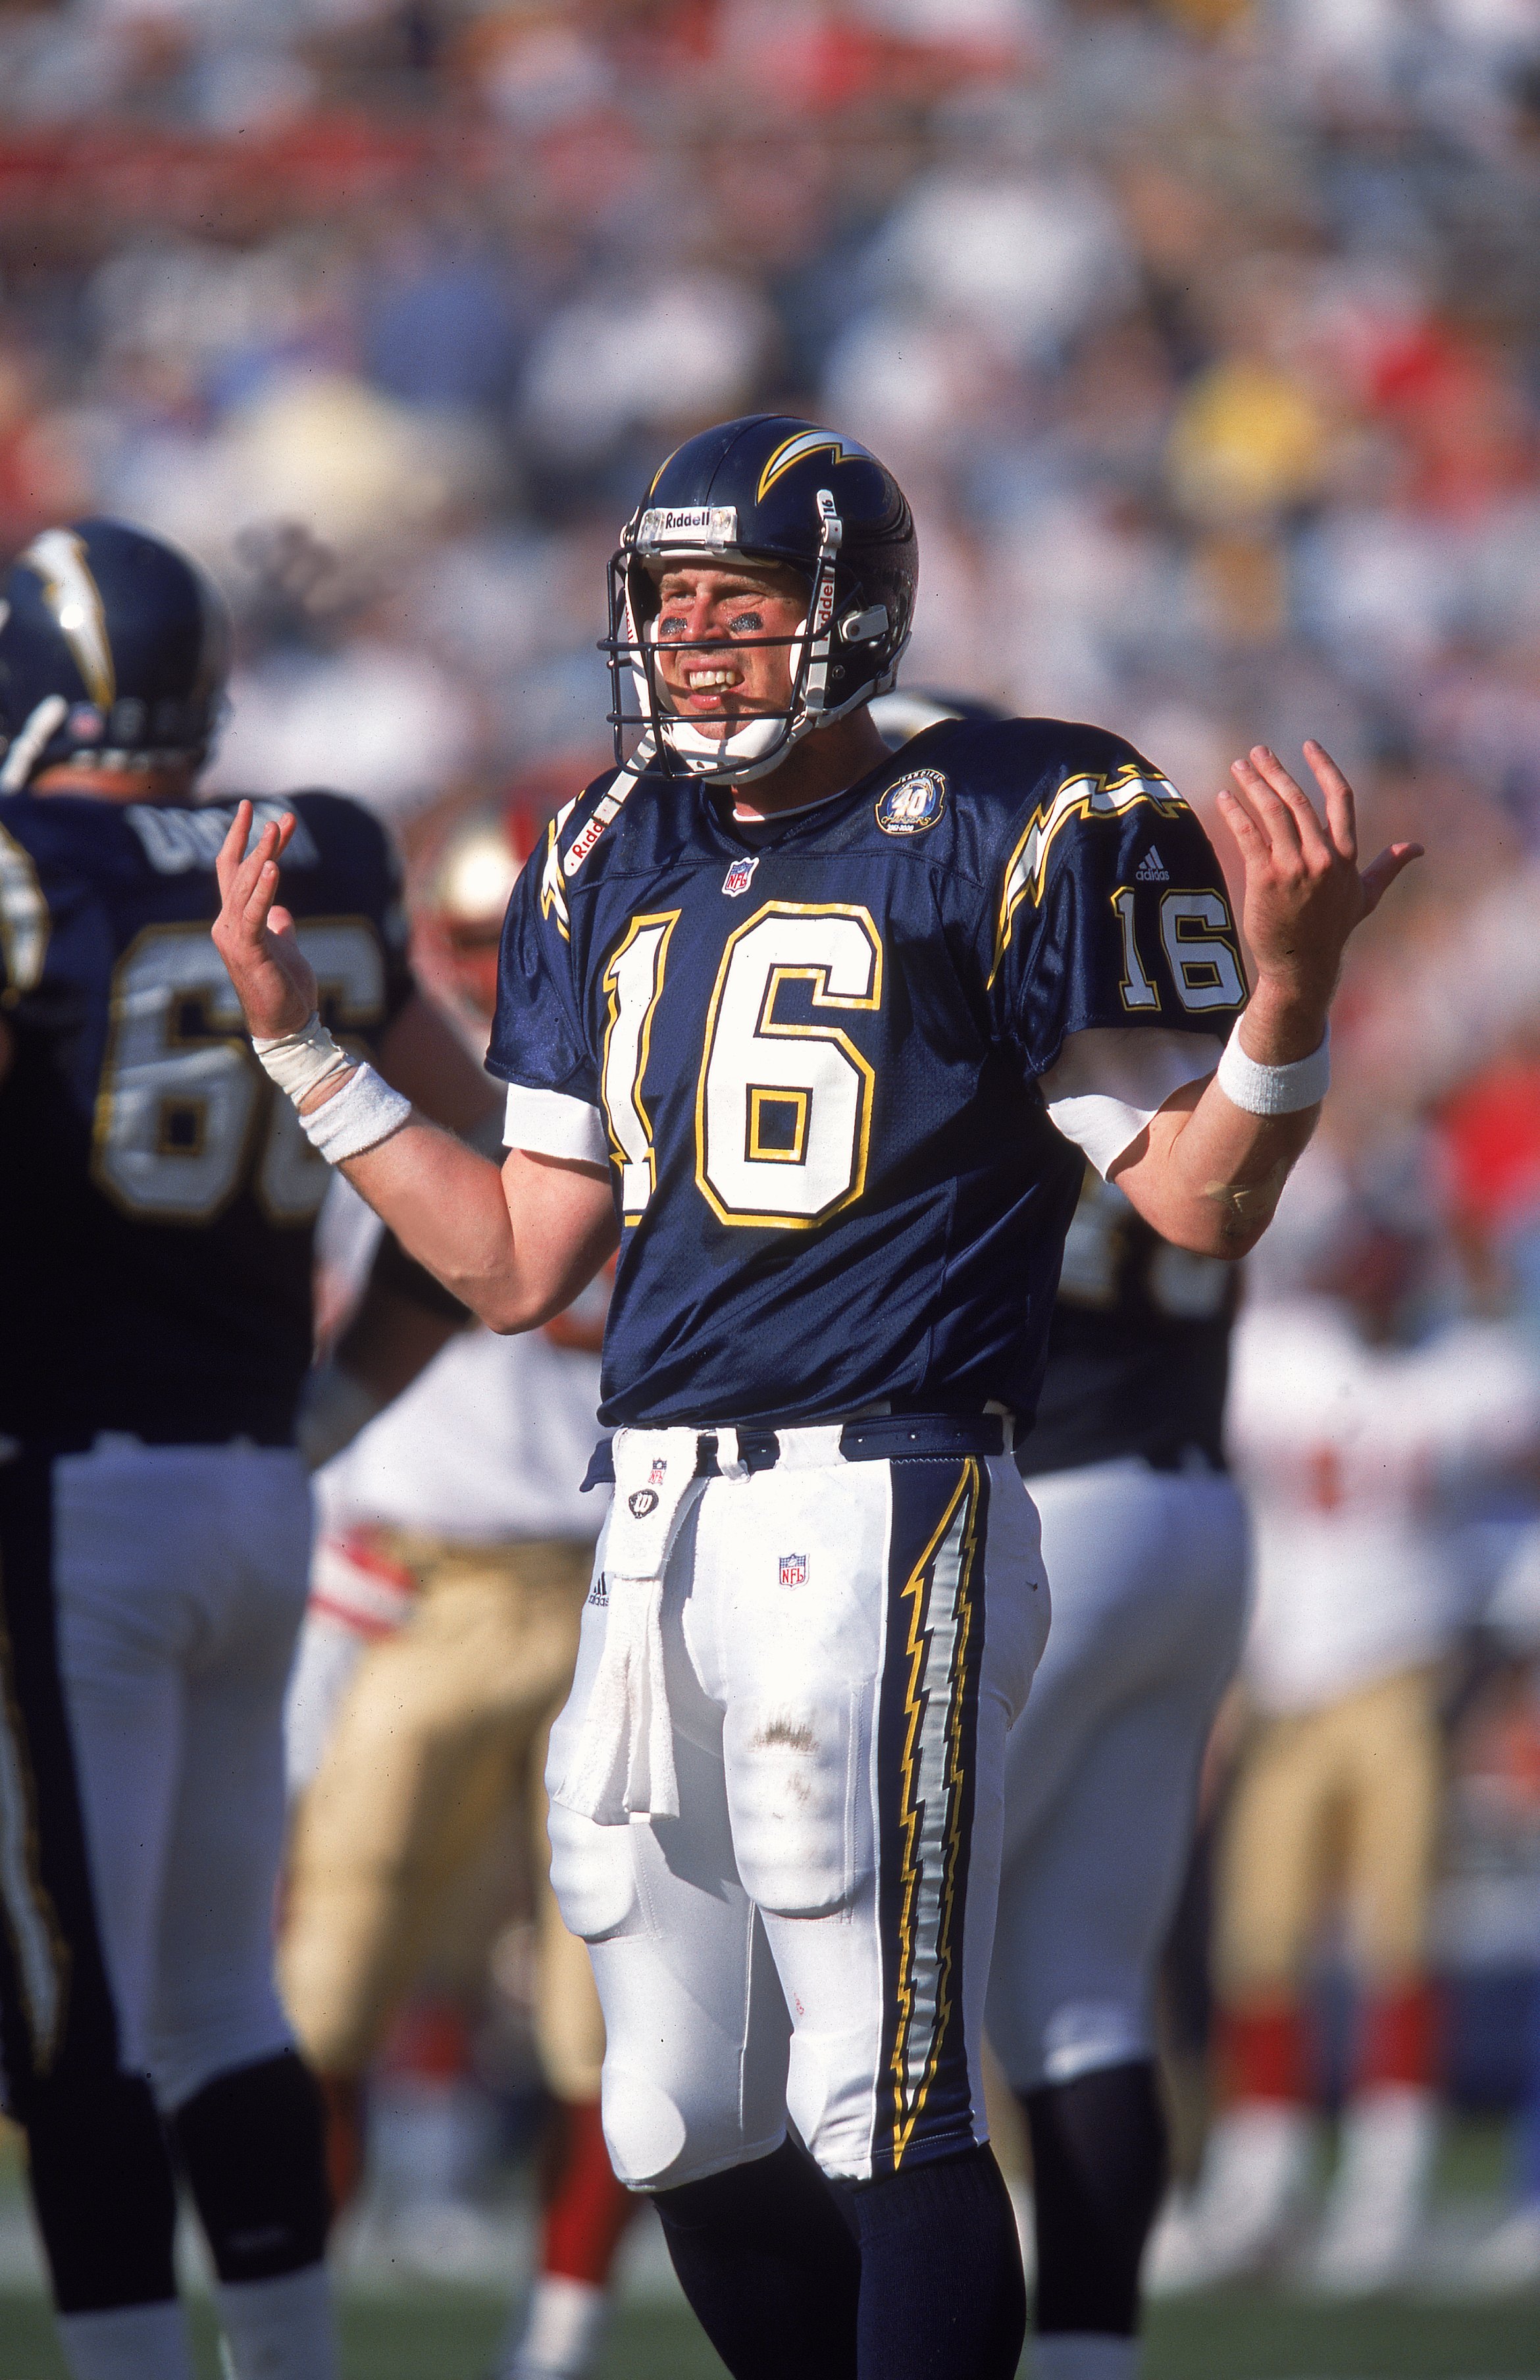 SAN DIEGO, CA - DEC 3: Ryan Leaf #16 of the San Diego Chargers reacts to a call during an NFL game against the San Francisco 49ers on December 3, 2000 at QualComm Stadium in San Diego, California.  The 49ers defeated the Chargers 44-17. (Photo by Stephen